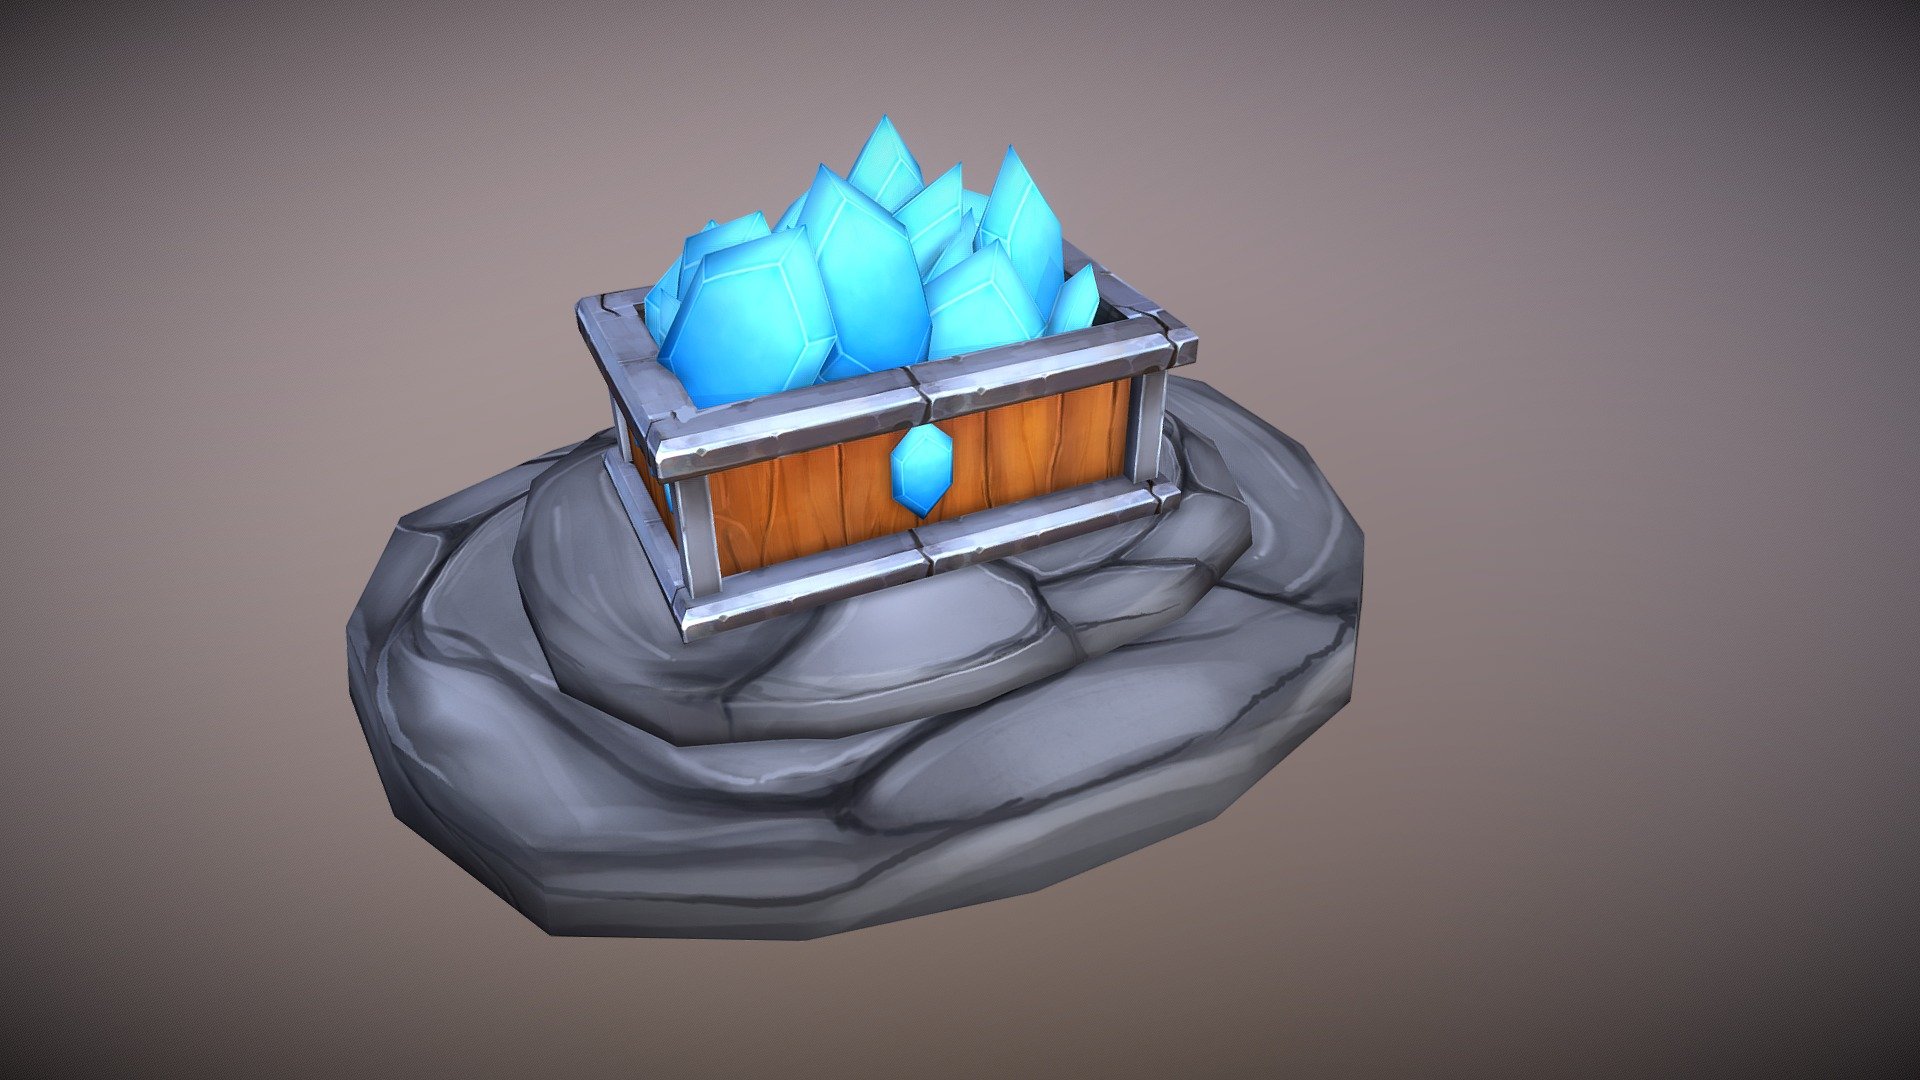 Hi! Thank you for using my model. I hope will serve you well in your game project.

This low-poly model is intended to be used for game engine, PC,mobile games or console with hand made texture. The model has been checked &amp; optimized for any game engine. It's based on mining place as inspiration.

Textures are build base on Unity 5 - Standard Metallic with a resolution of 2048 x 2048 Px but you can use it on any 3D game engine that supports this workflow: -Albedo or Diffuse with normal map as extra for stone only.

File Formats: OBJ, Fbx, .mb

If you notice any issues, feel free to contact me and I will fix it right away. Thank you! - Blue Gems - Buy Royalty Free 3D model by I.Sebastian.C 3d model